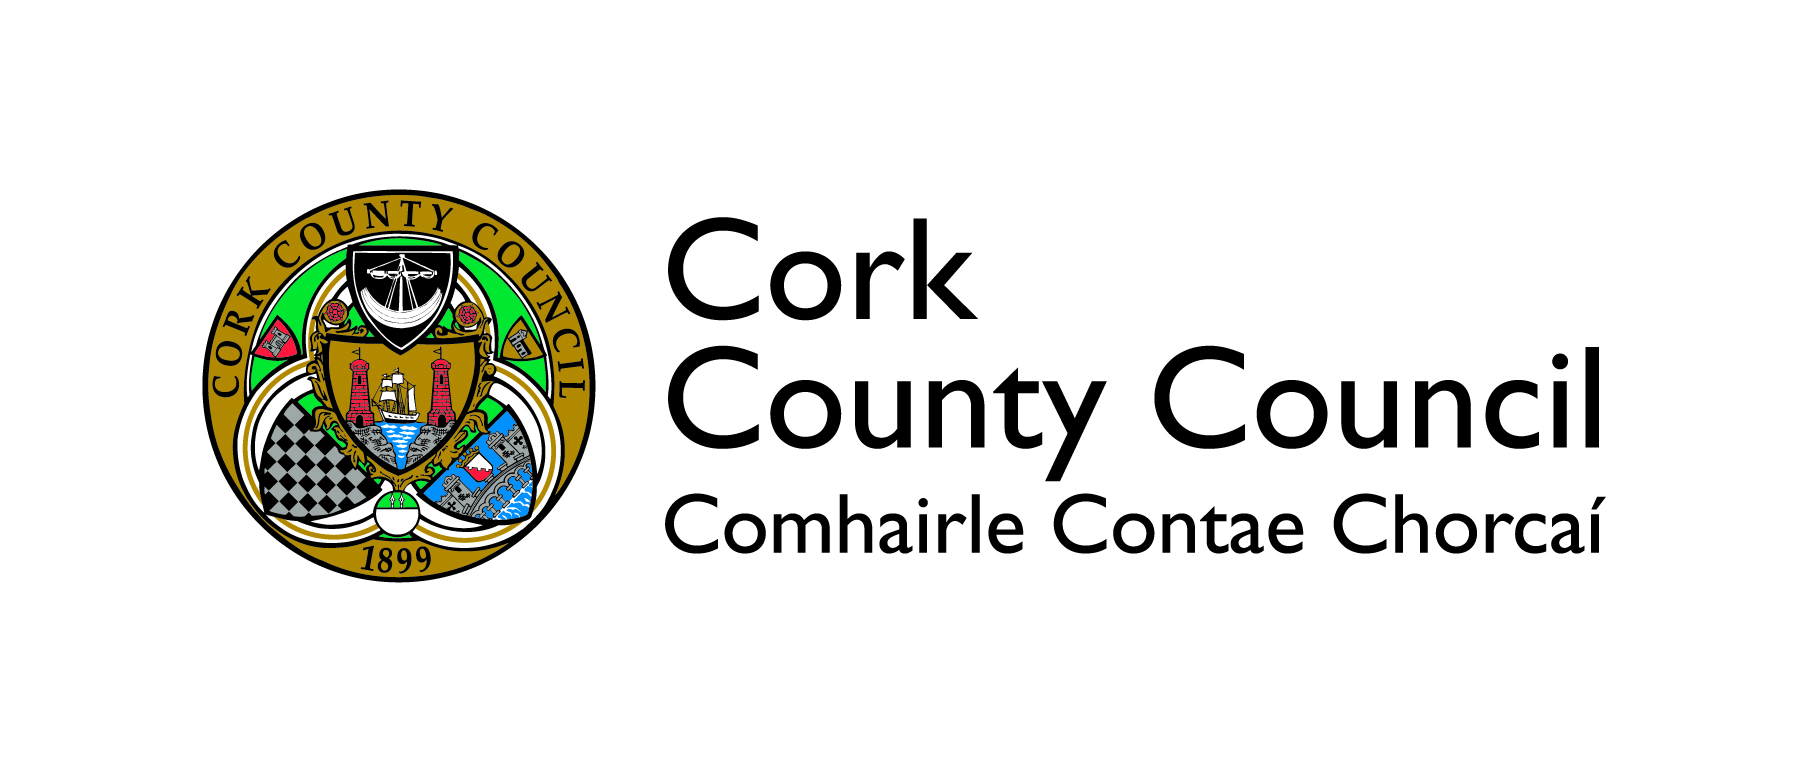 €1.5 million Council Funding Allocated to Cork Community Groups – €500,000 Allocated to North Cork Groups Today